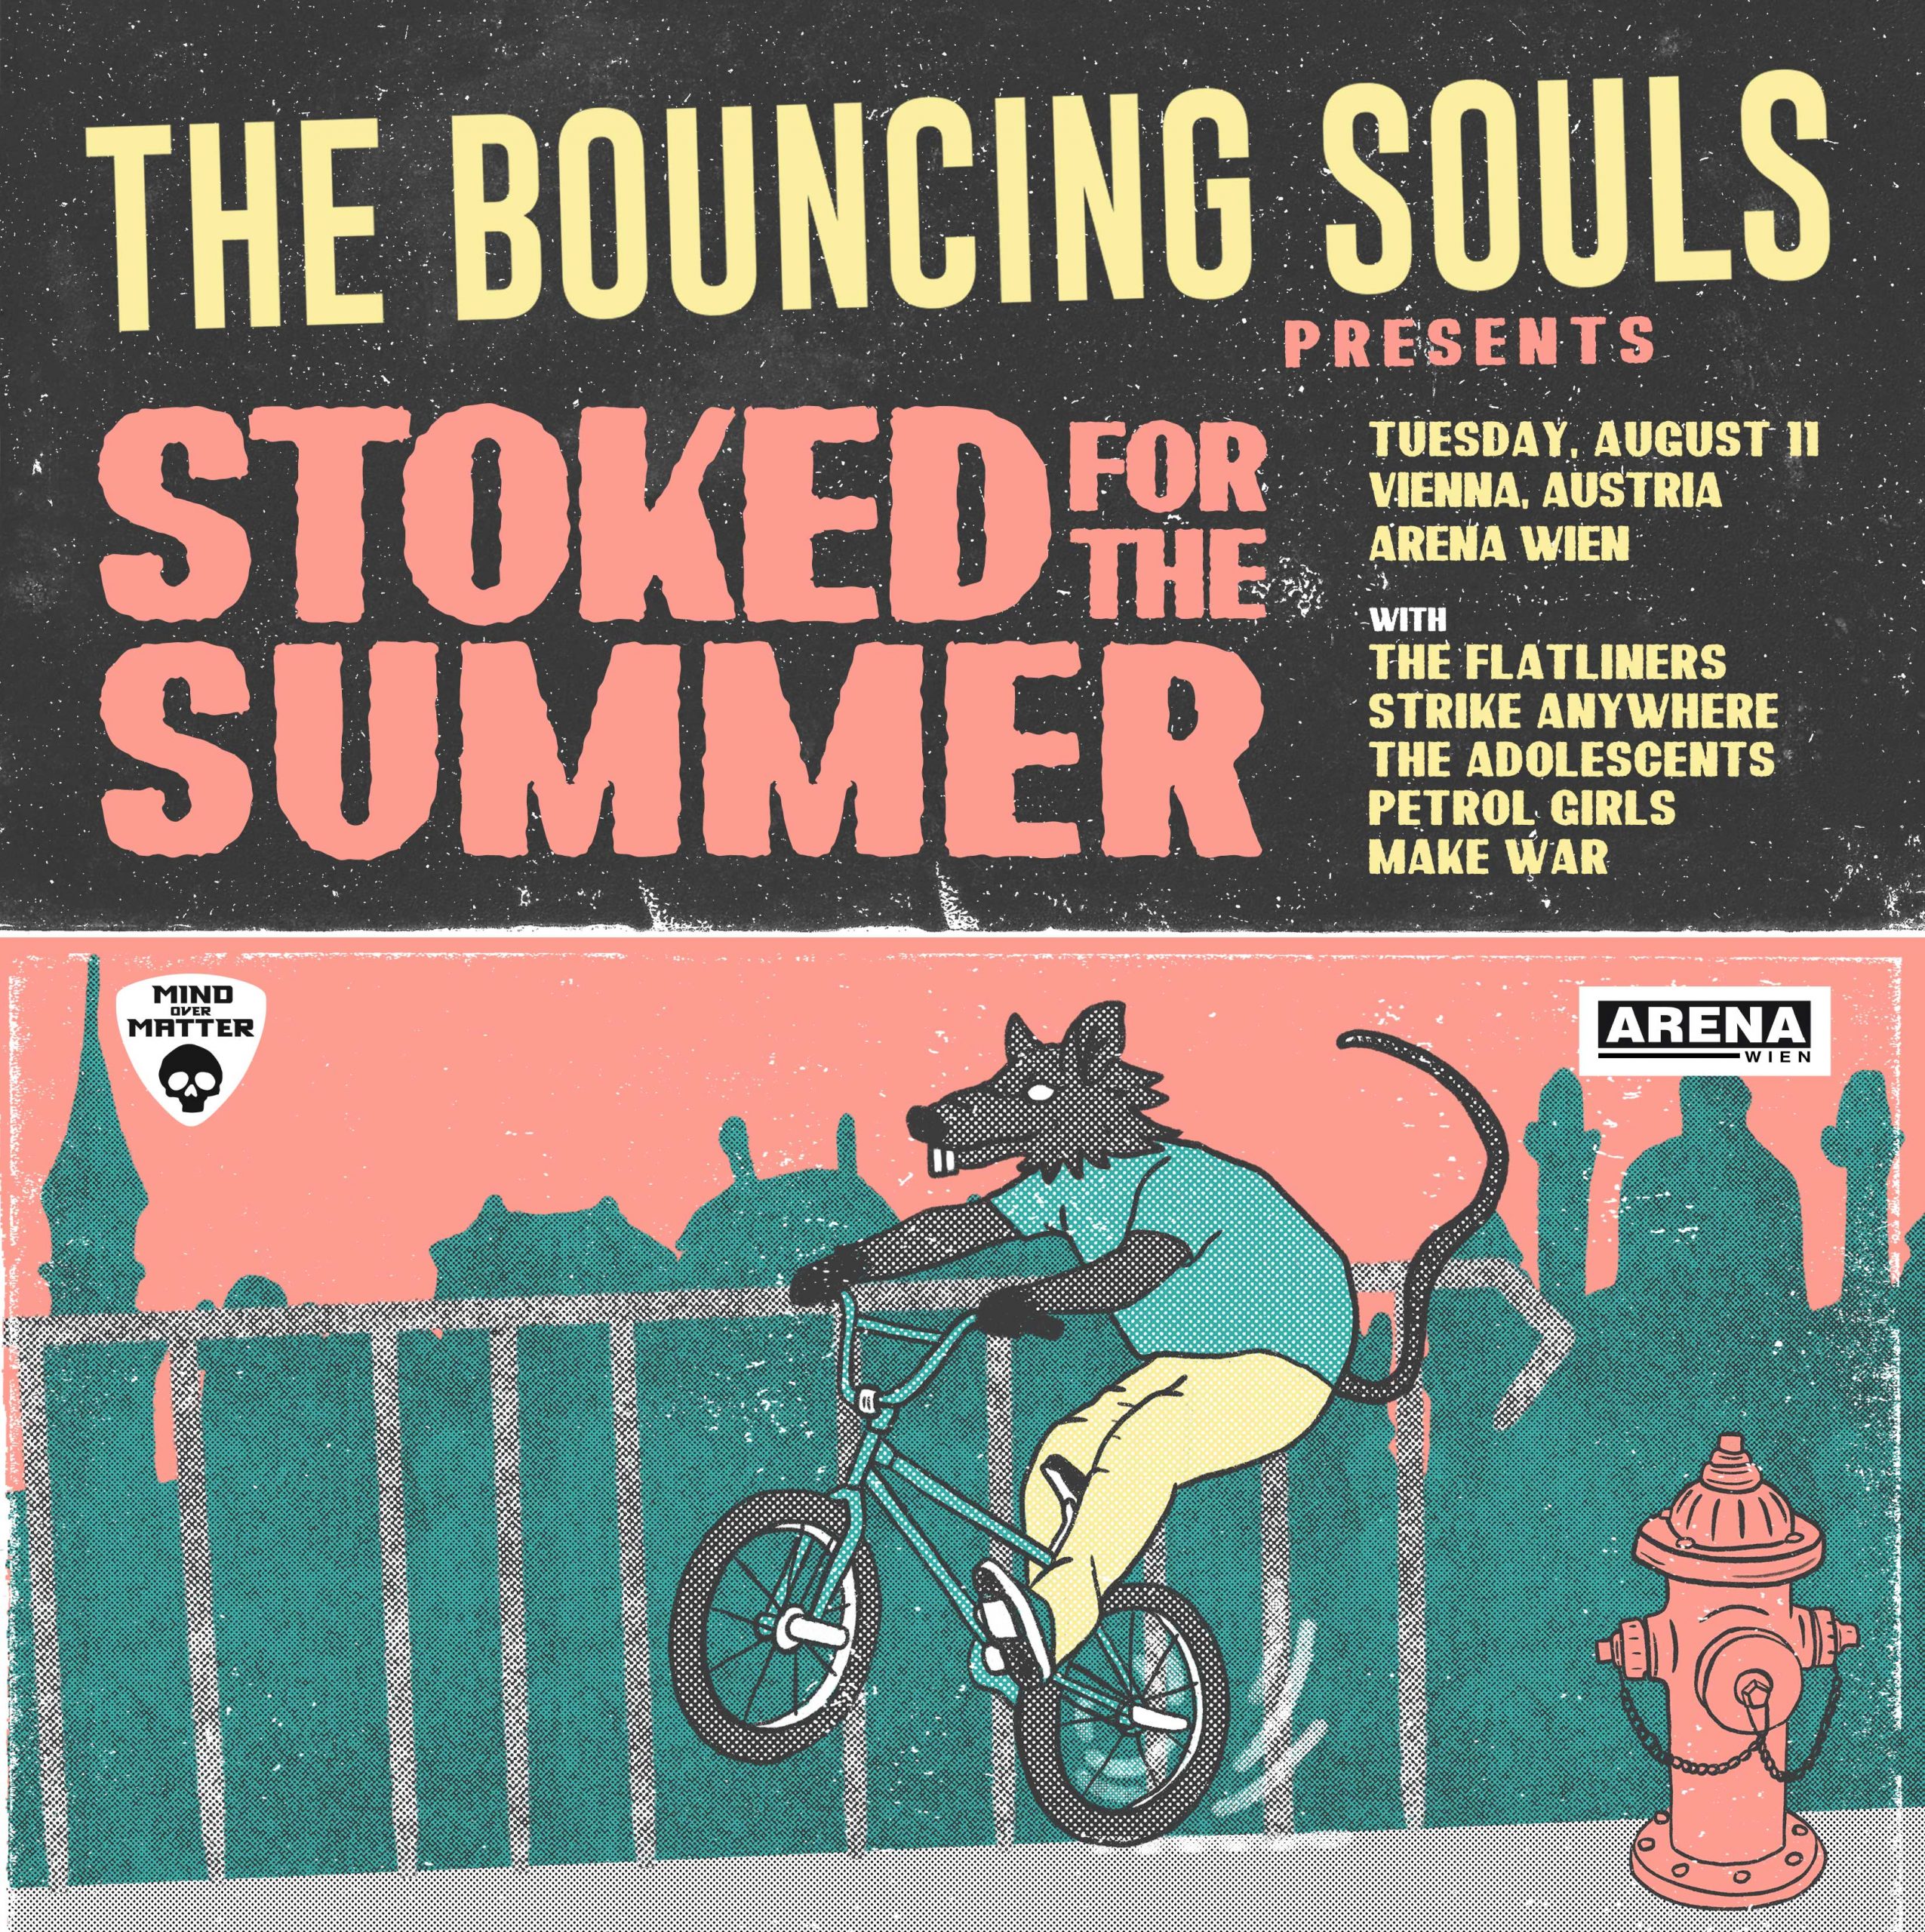 The Bouncing Souls am 11. August 2020 @ Arena Wien.